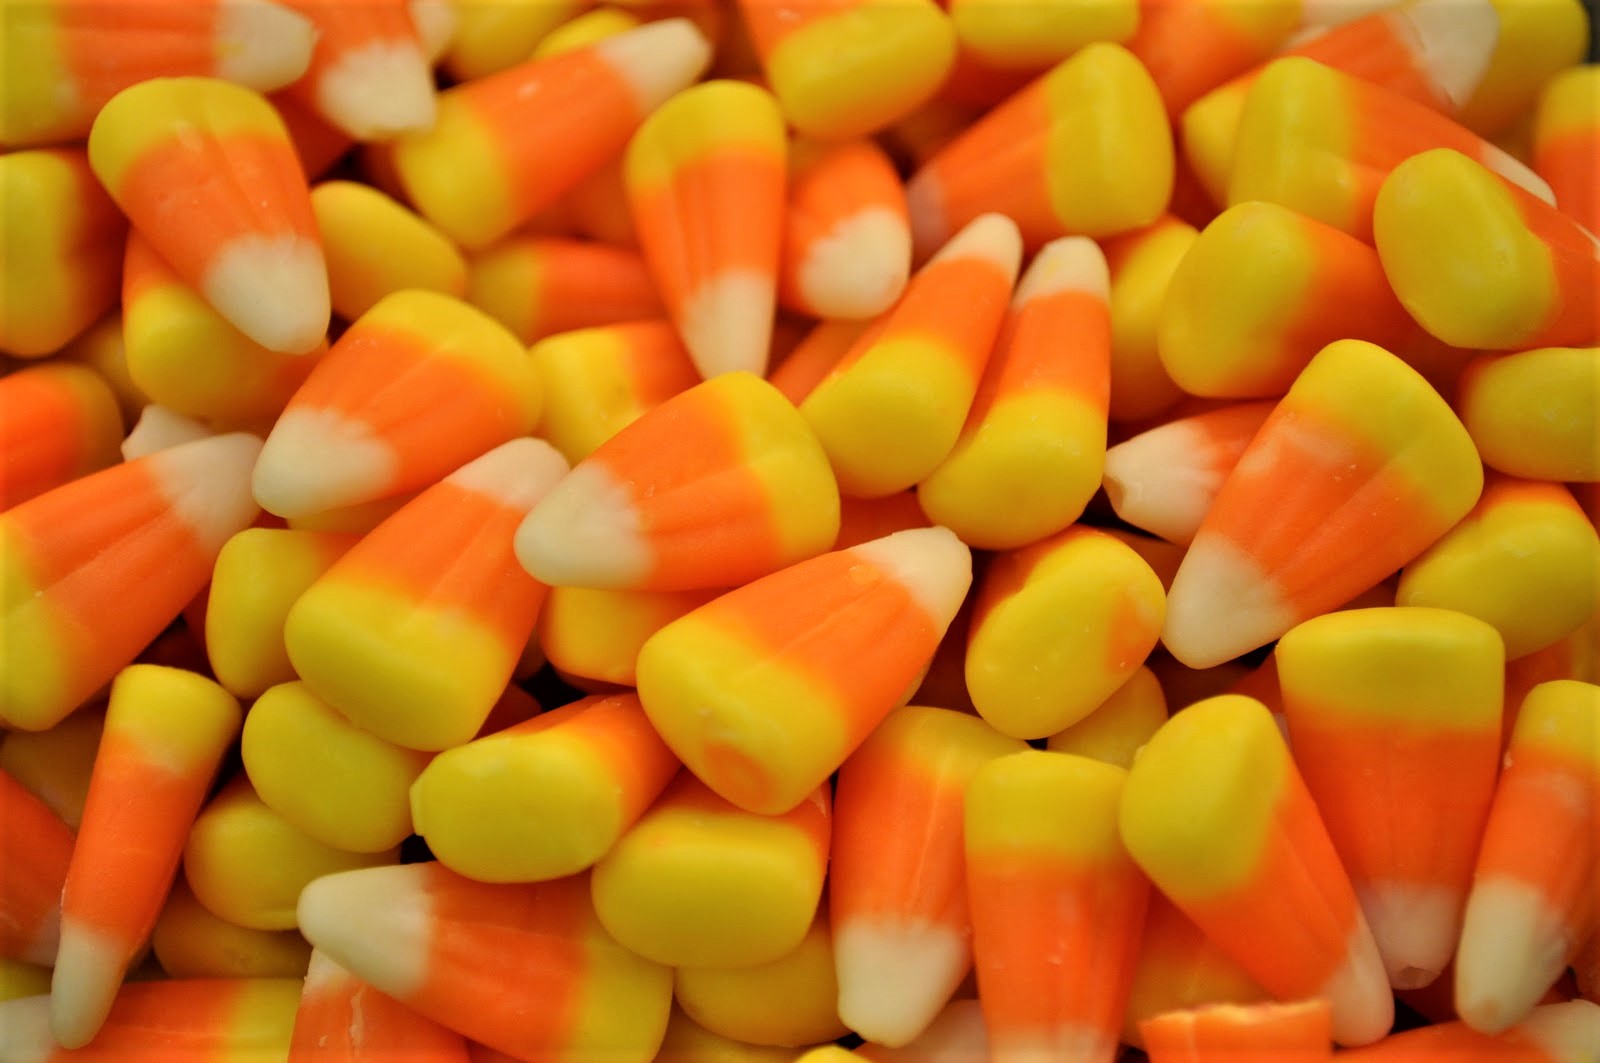 Candy Corn Wallpapers